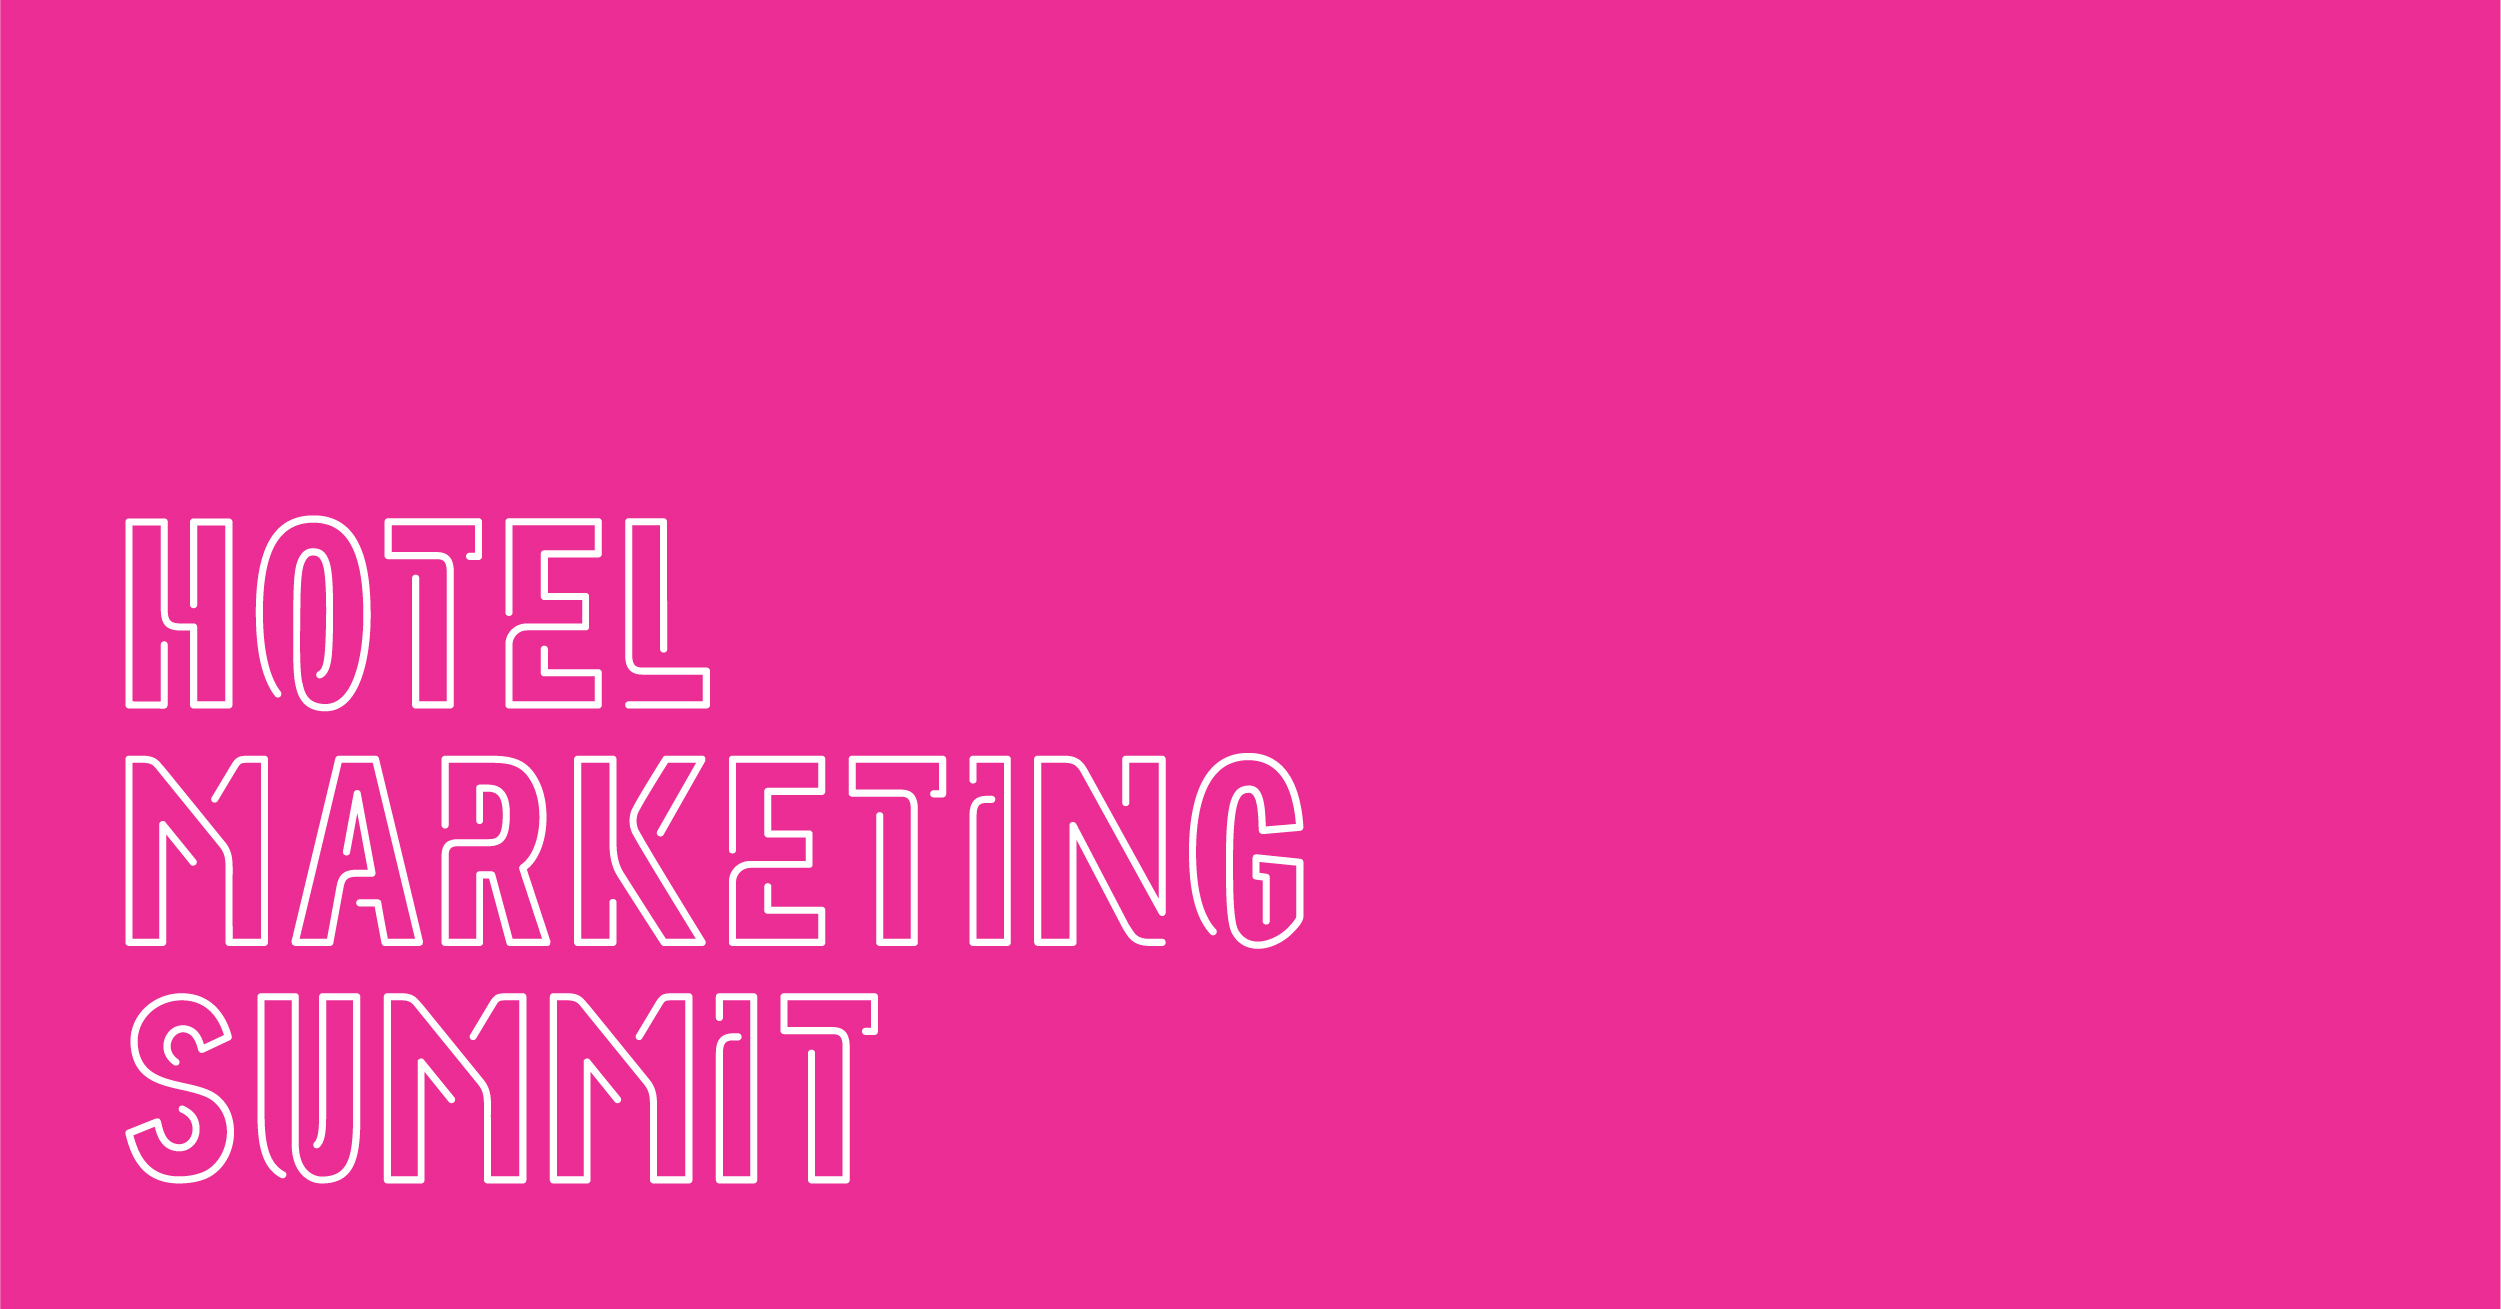 Hotel Marketing Summit, Central, New South Wales, Australia